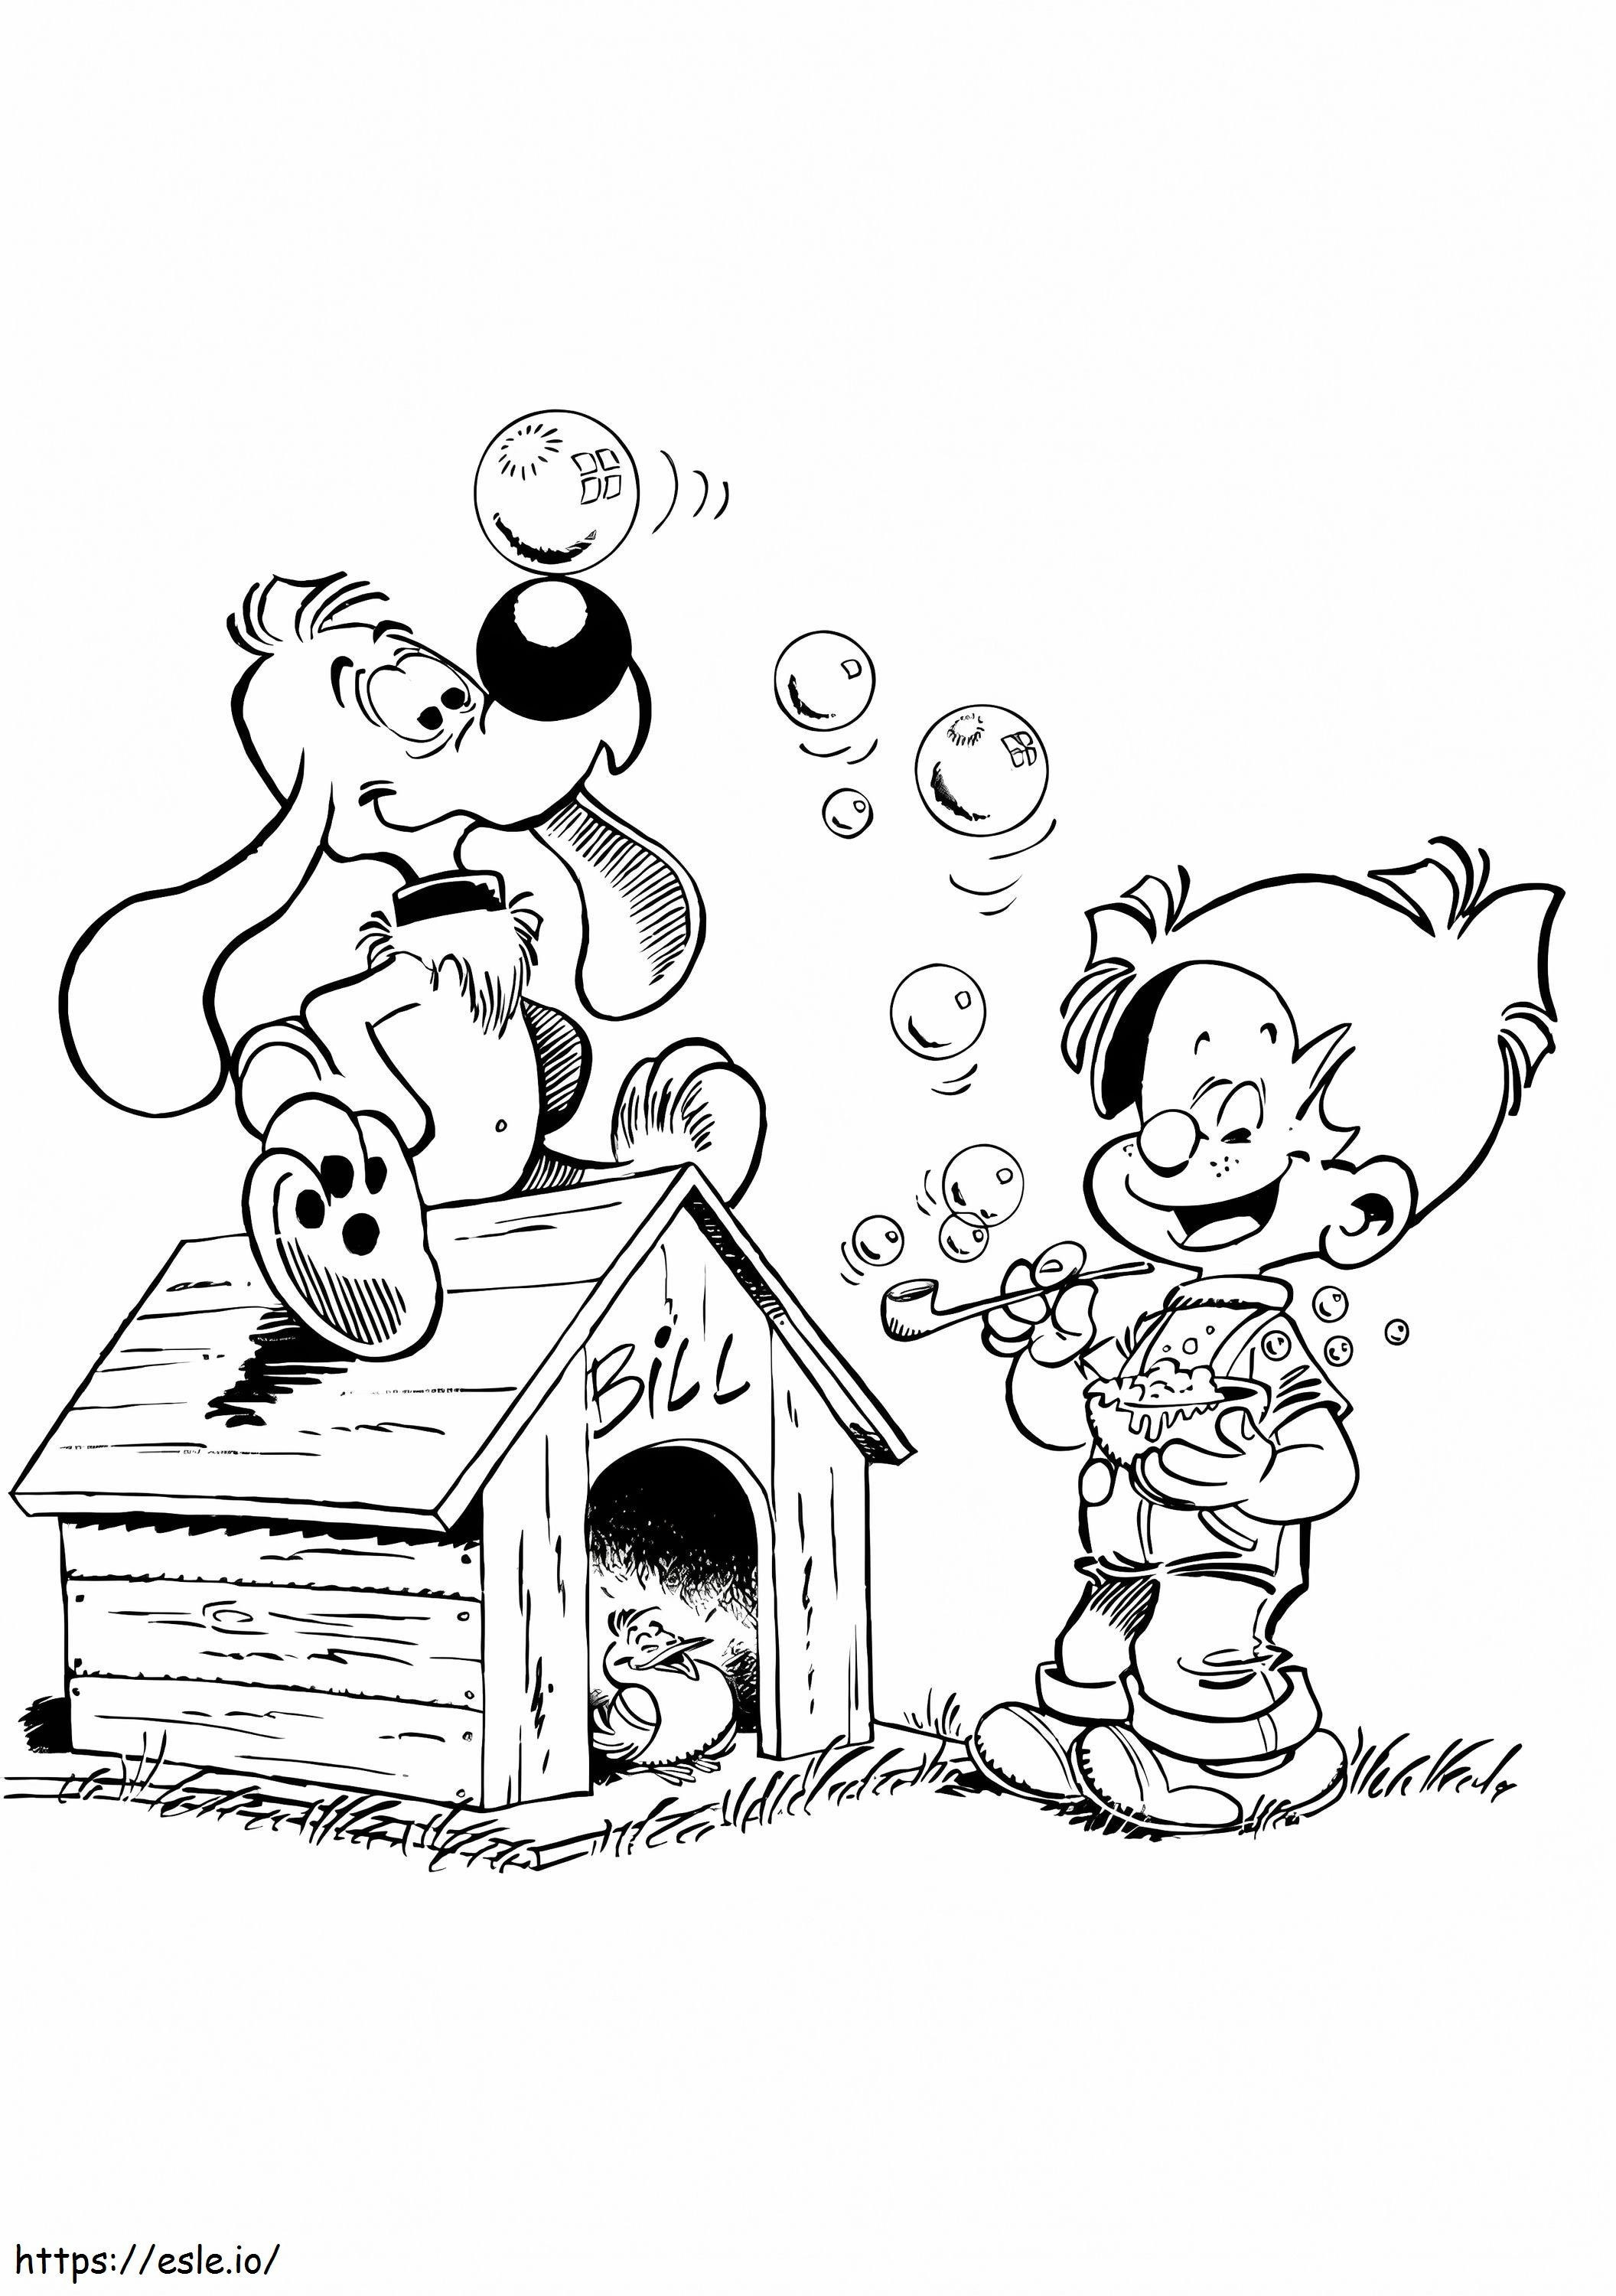 Billy And Buddy 2 coloring page